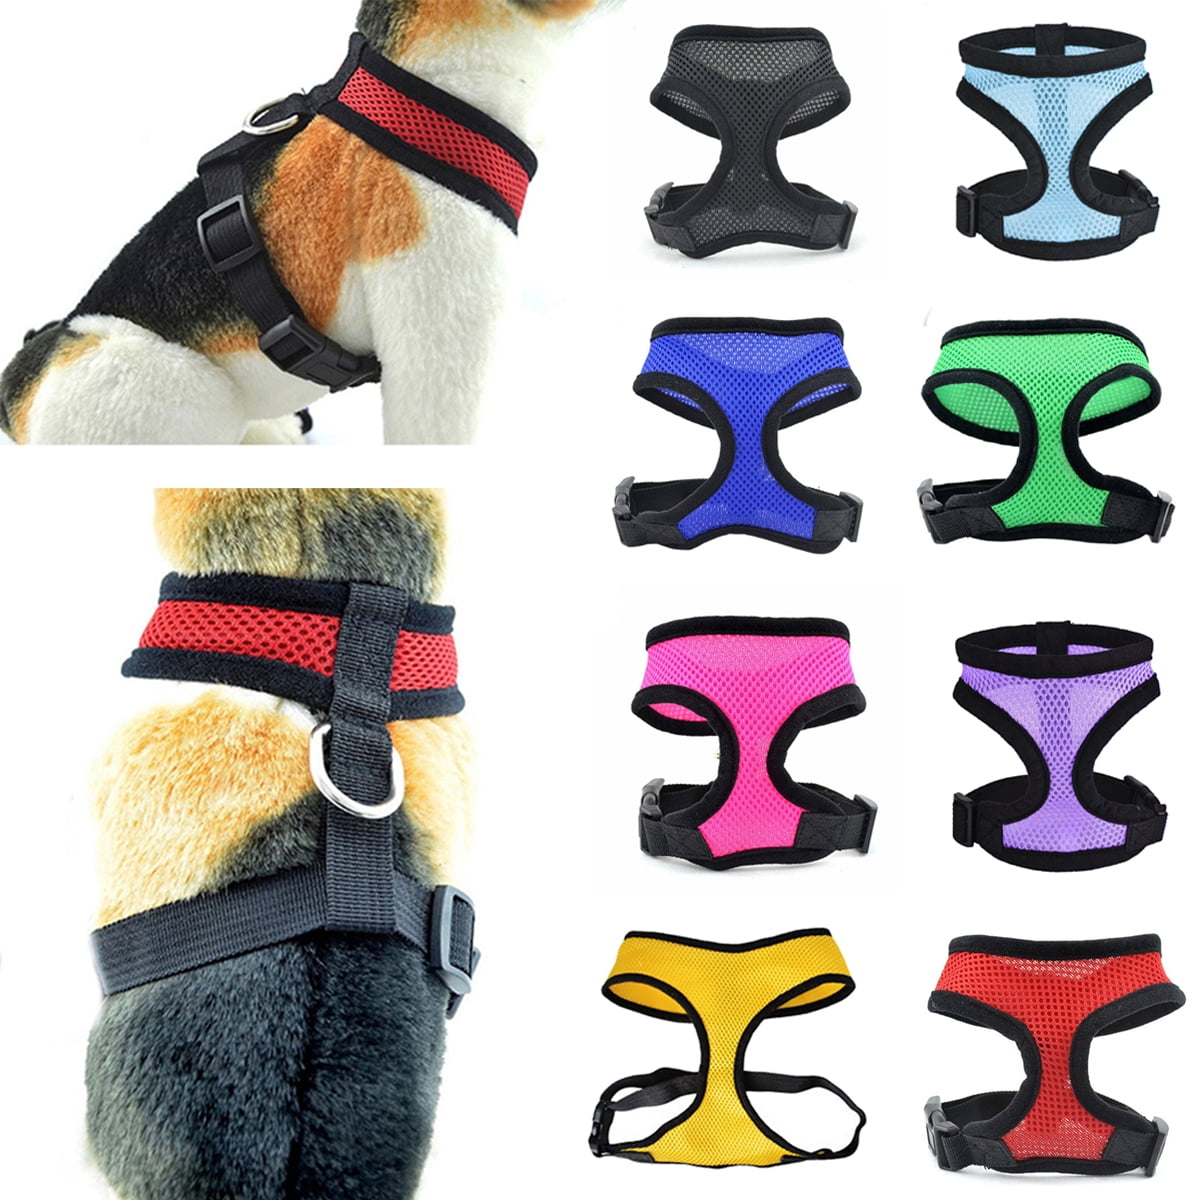 Mesh Soft Padded Dog Puppy Pet Harness 11 Colors 5 Sizes Comfortable Breathable 